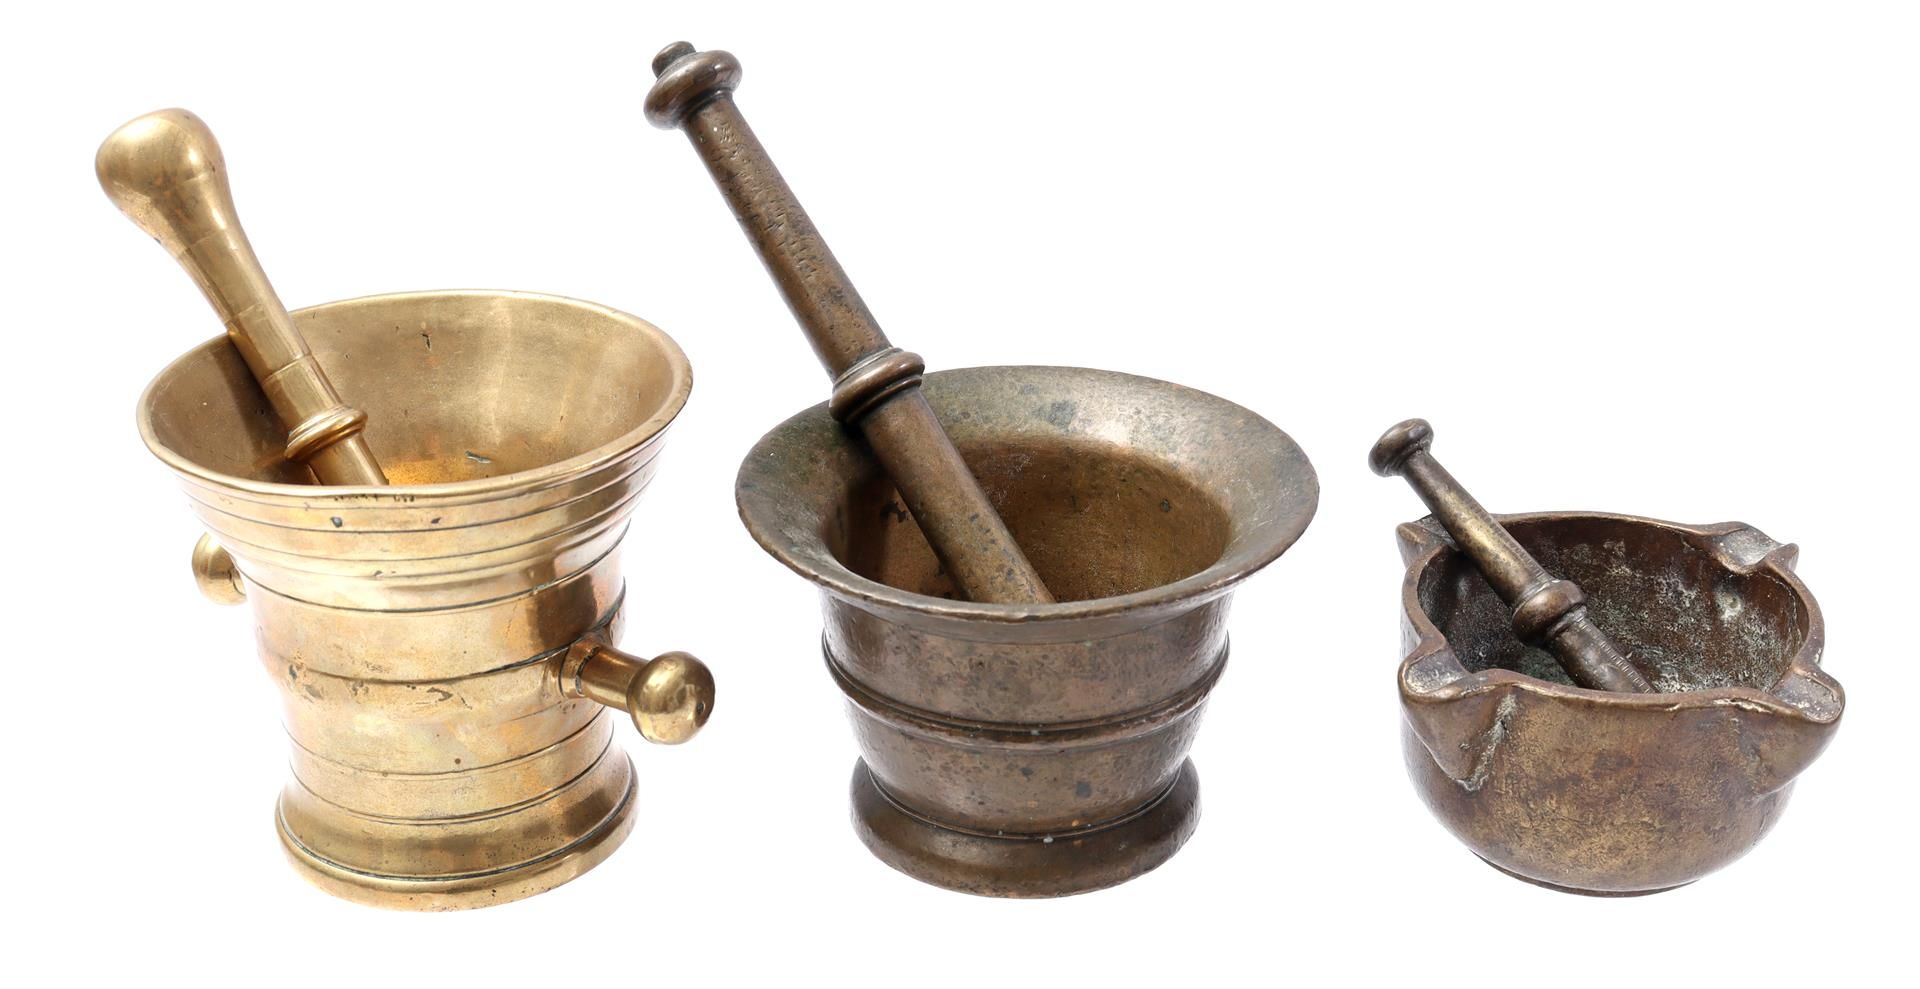 3 mortar with pestles